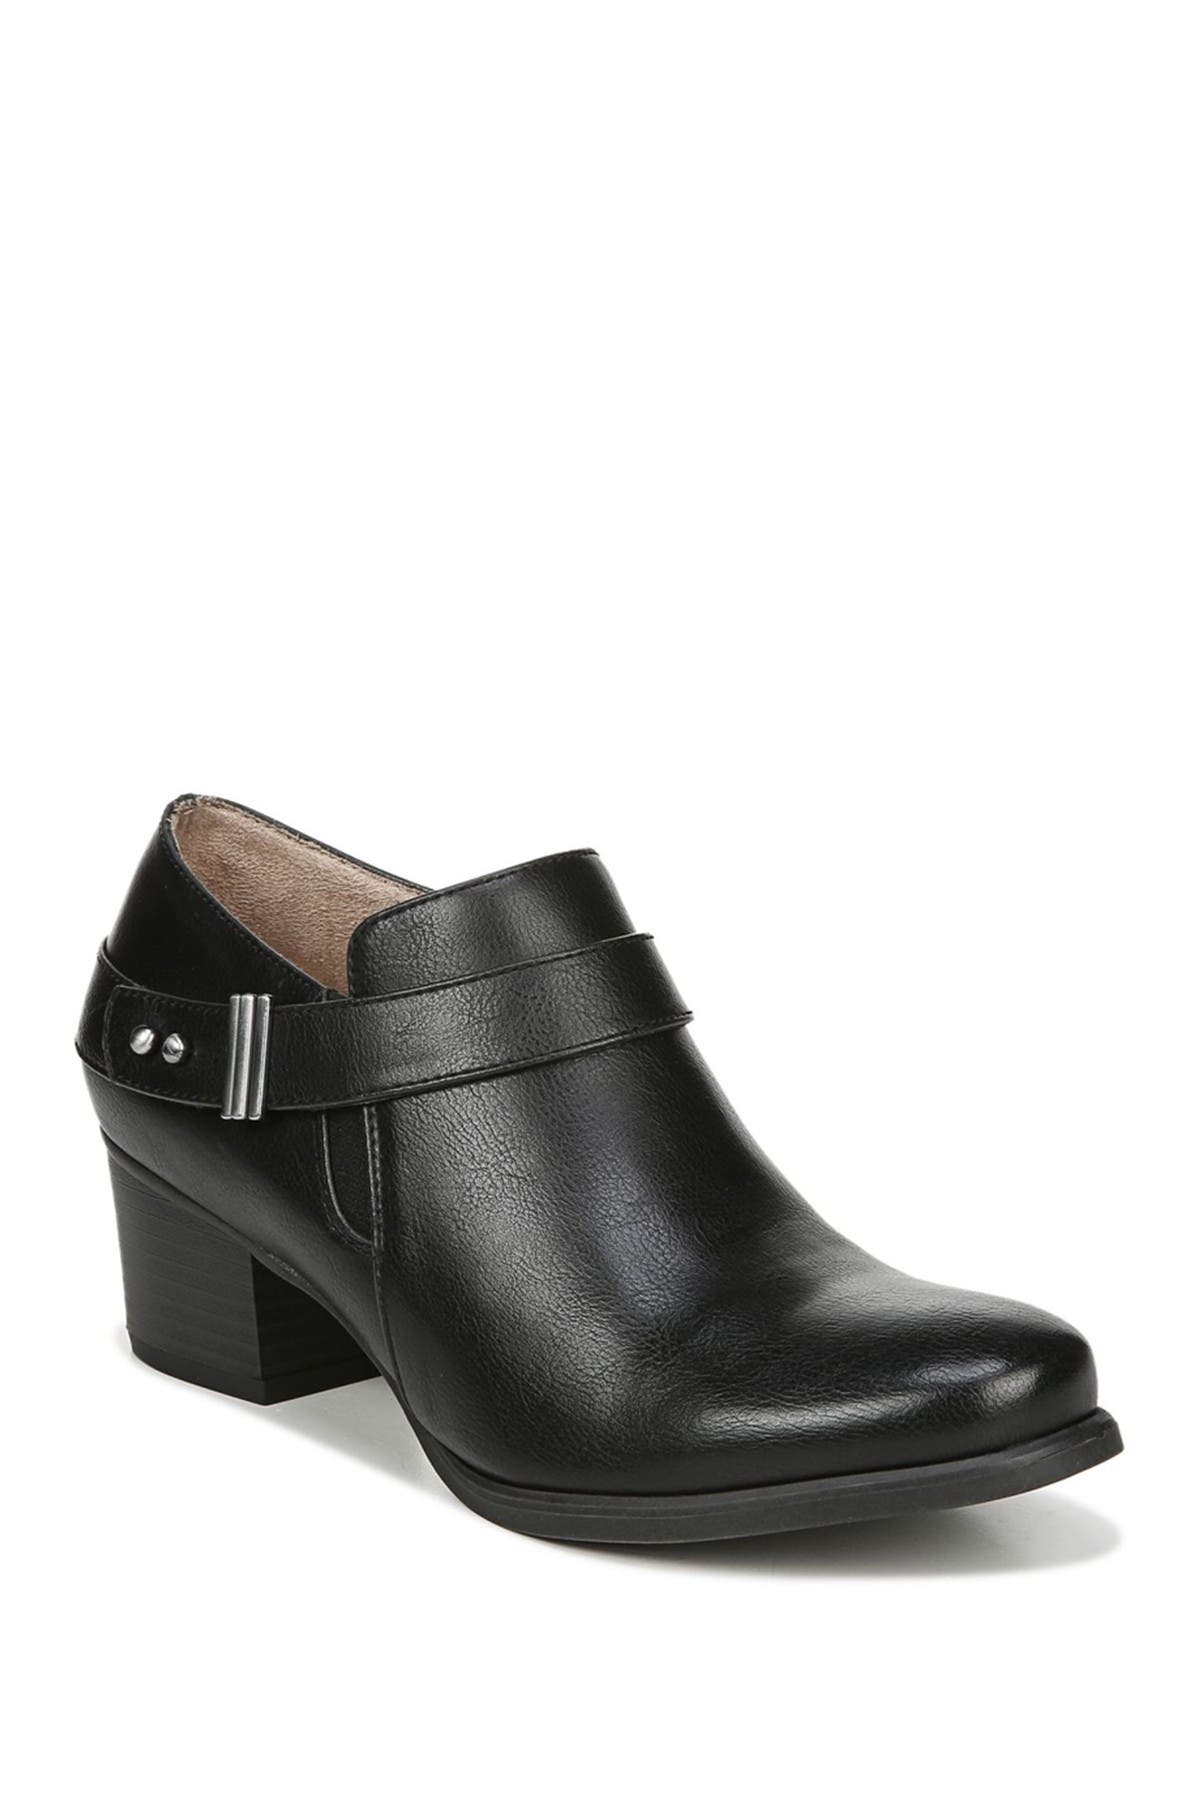 Naturalizer | Chaylee Ankle Bootie 